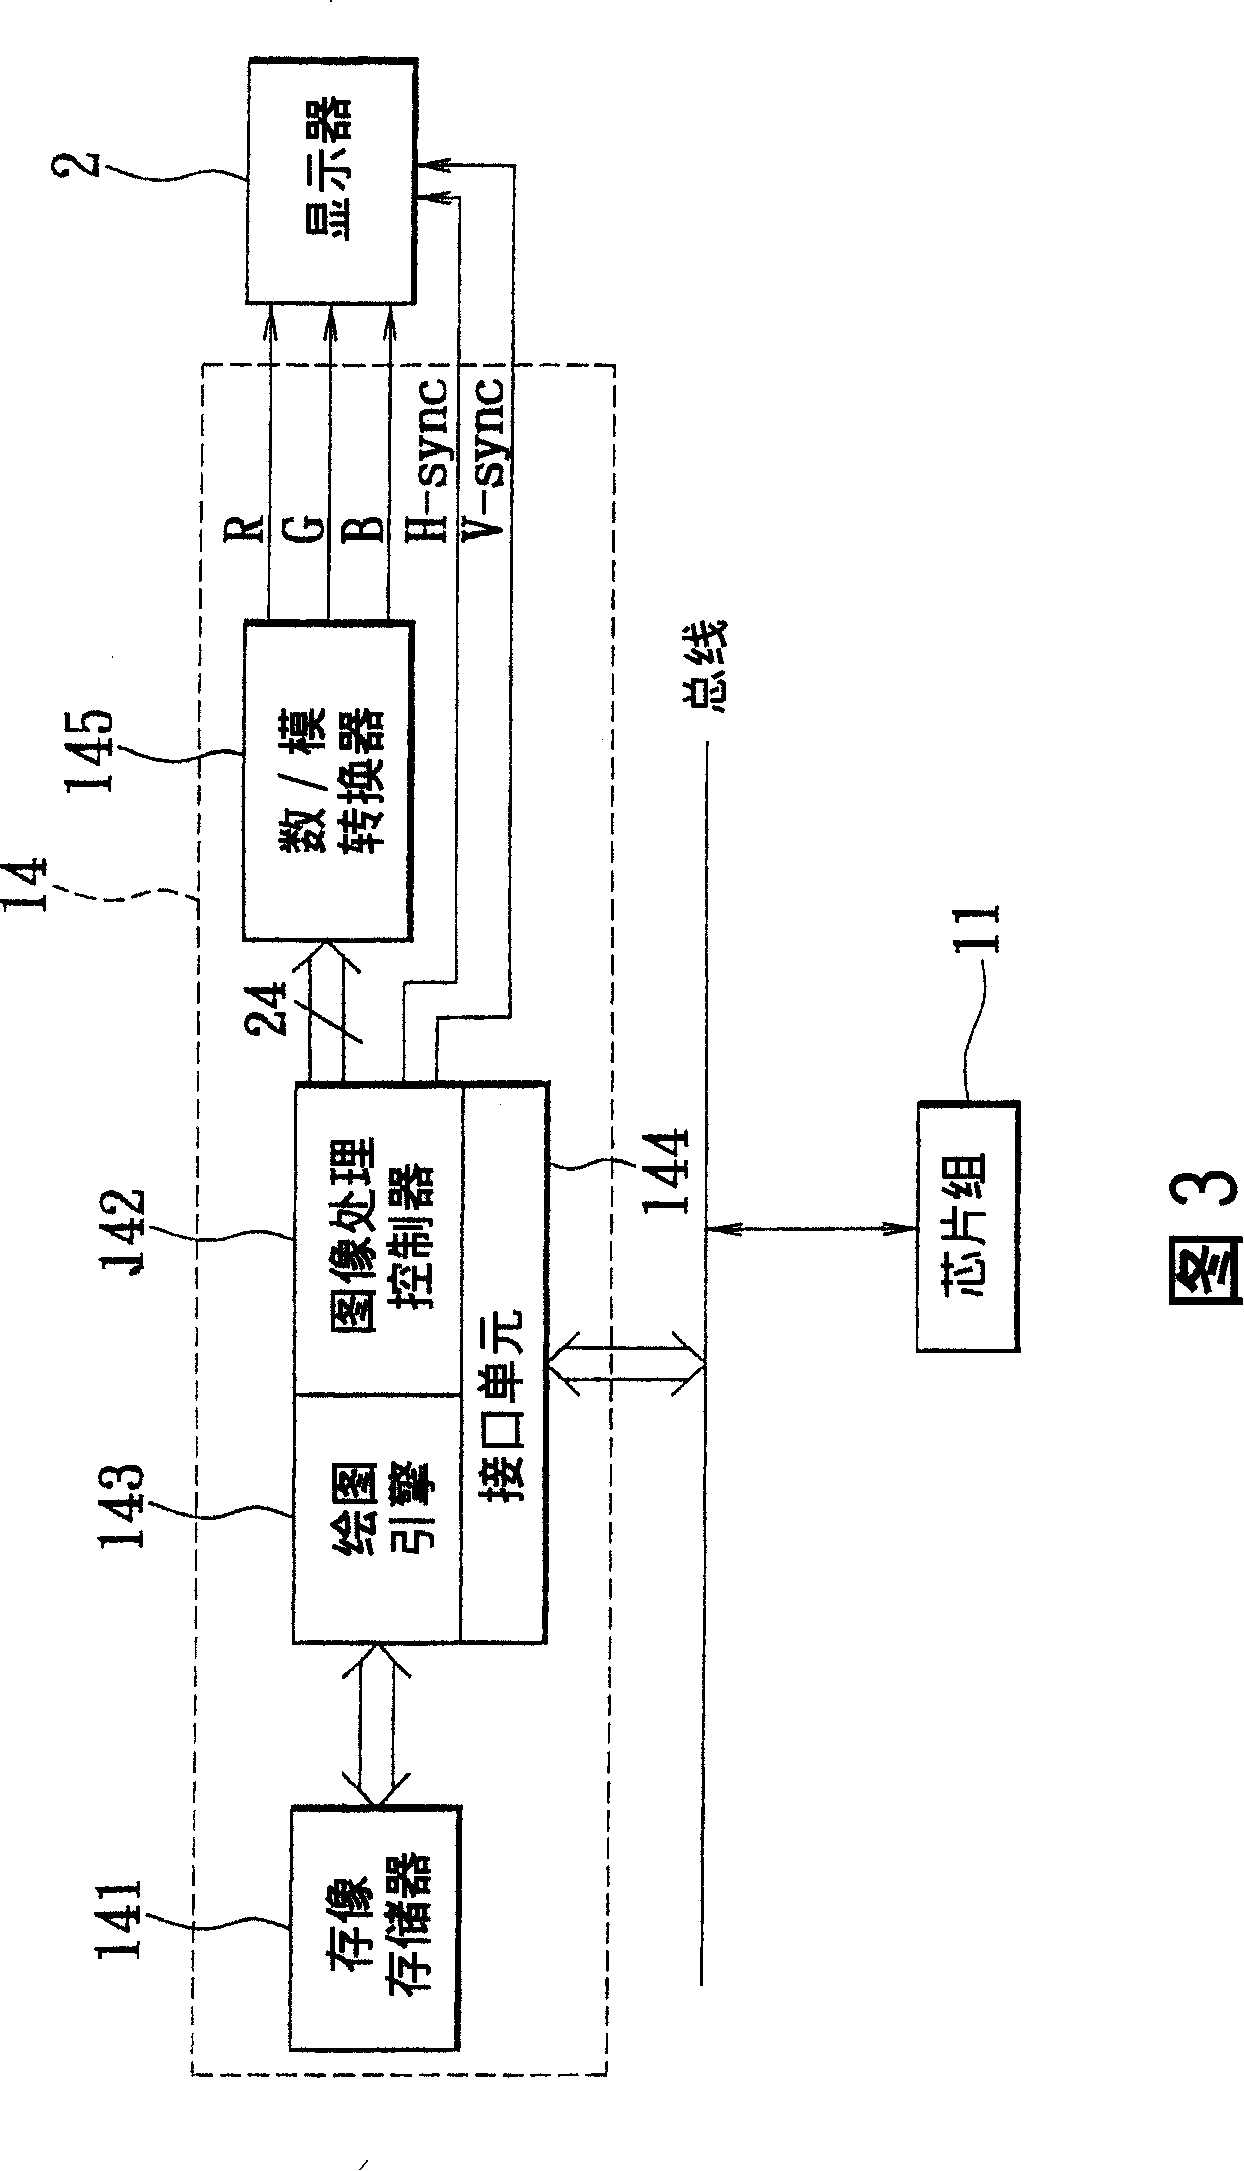 Display driving module with multi-path display output, mainboard, and method multi-path display output